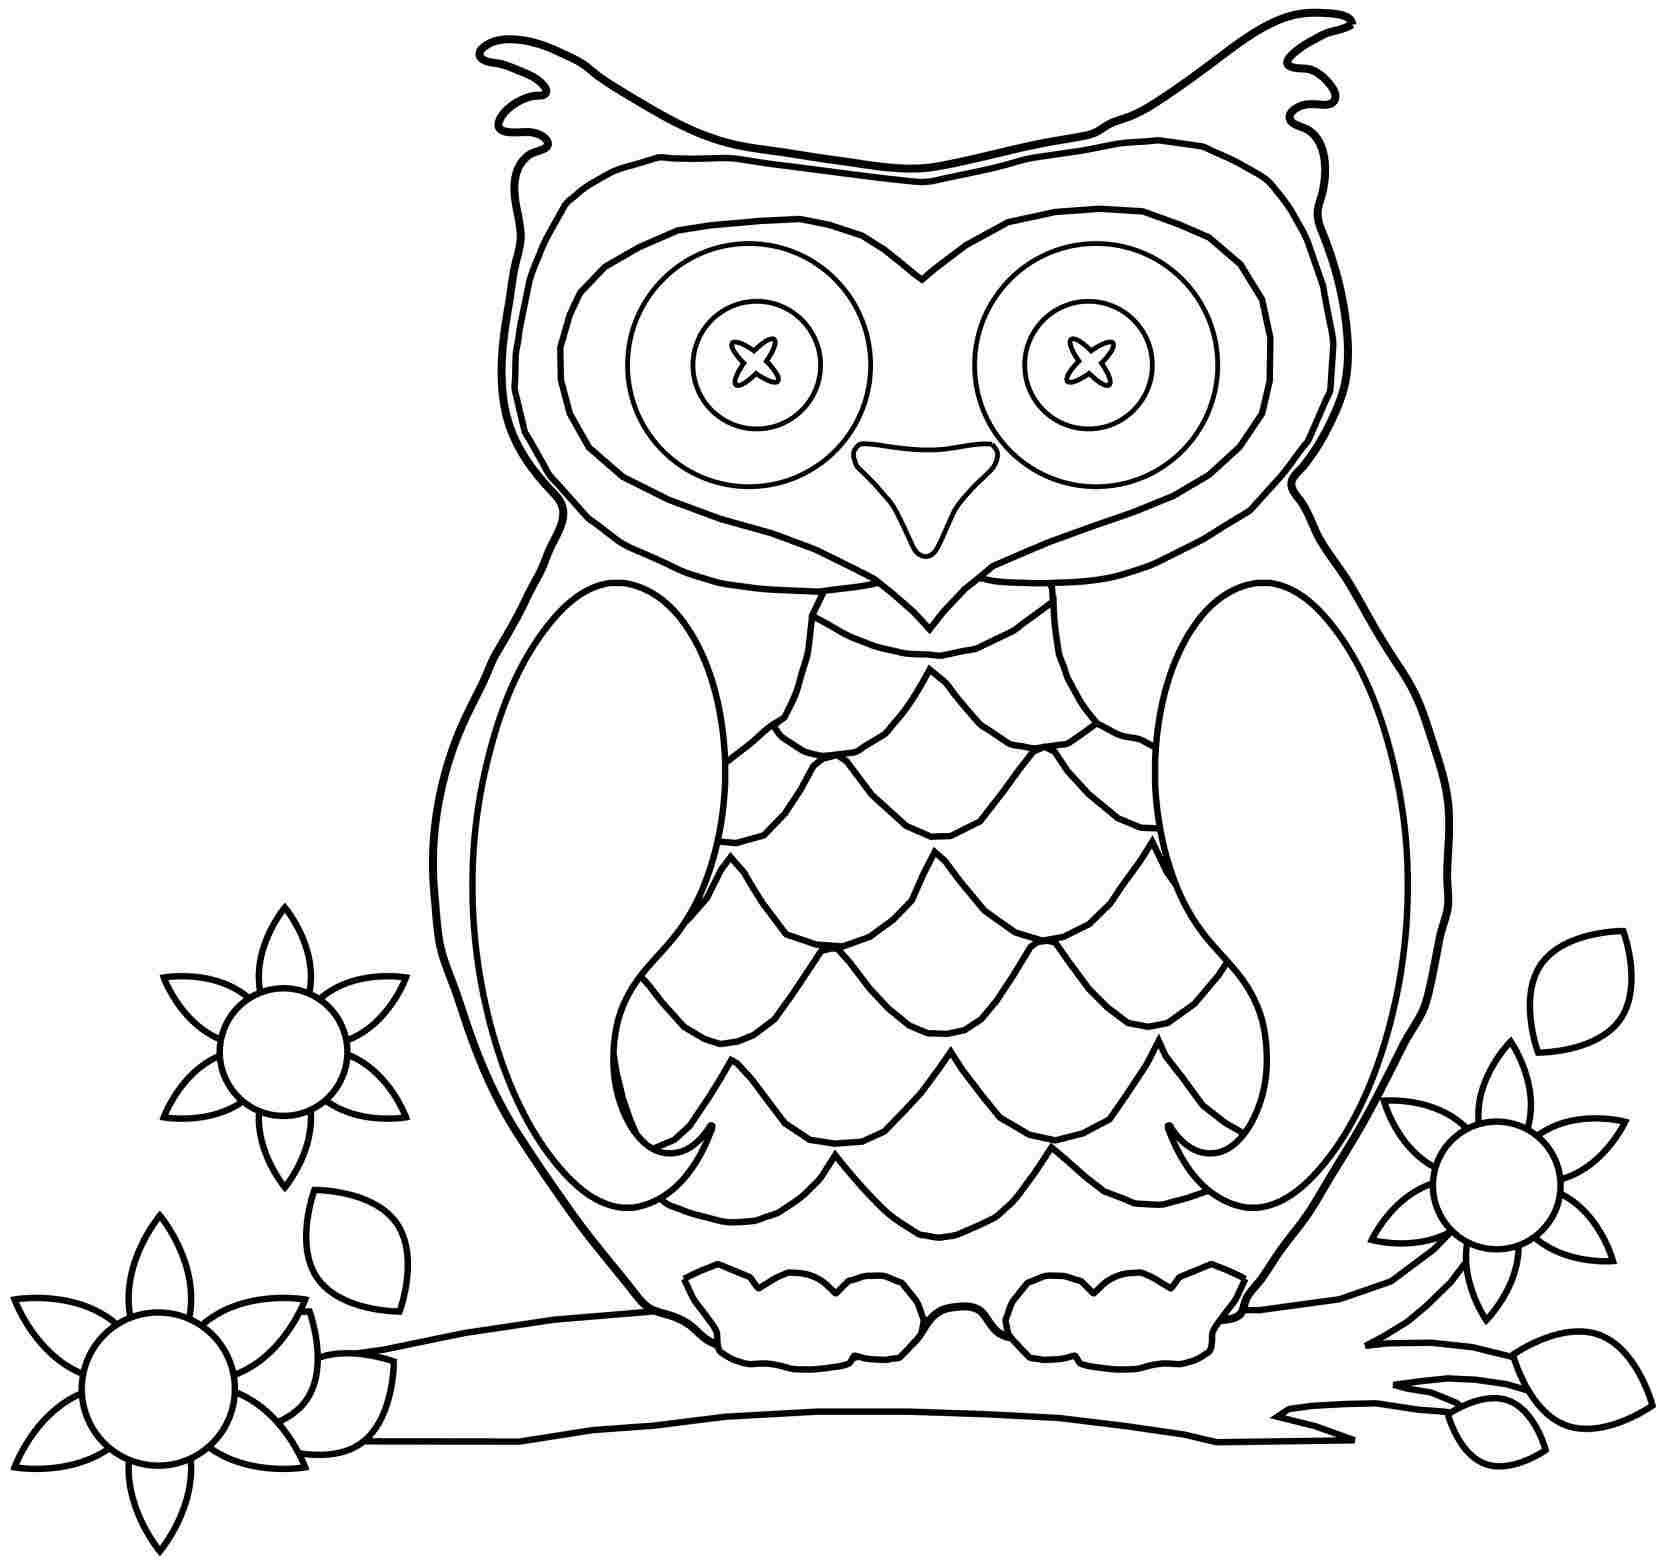 Owl Coloring Pages To Print Out Owl Coloring Pages Owl Coloring ...